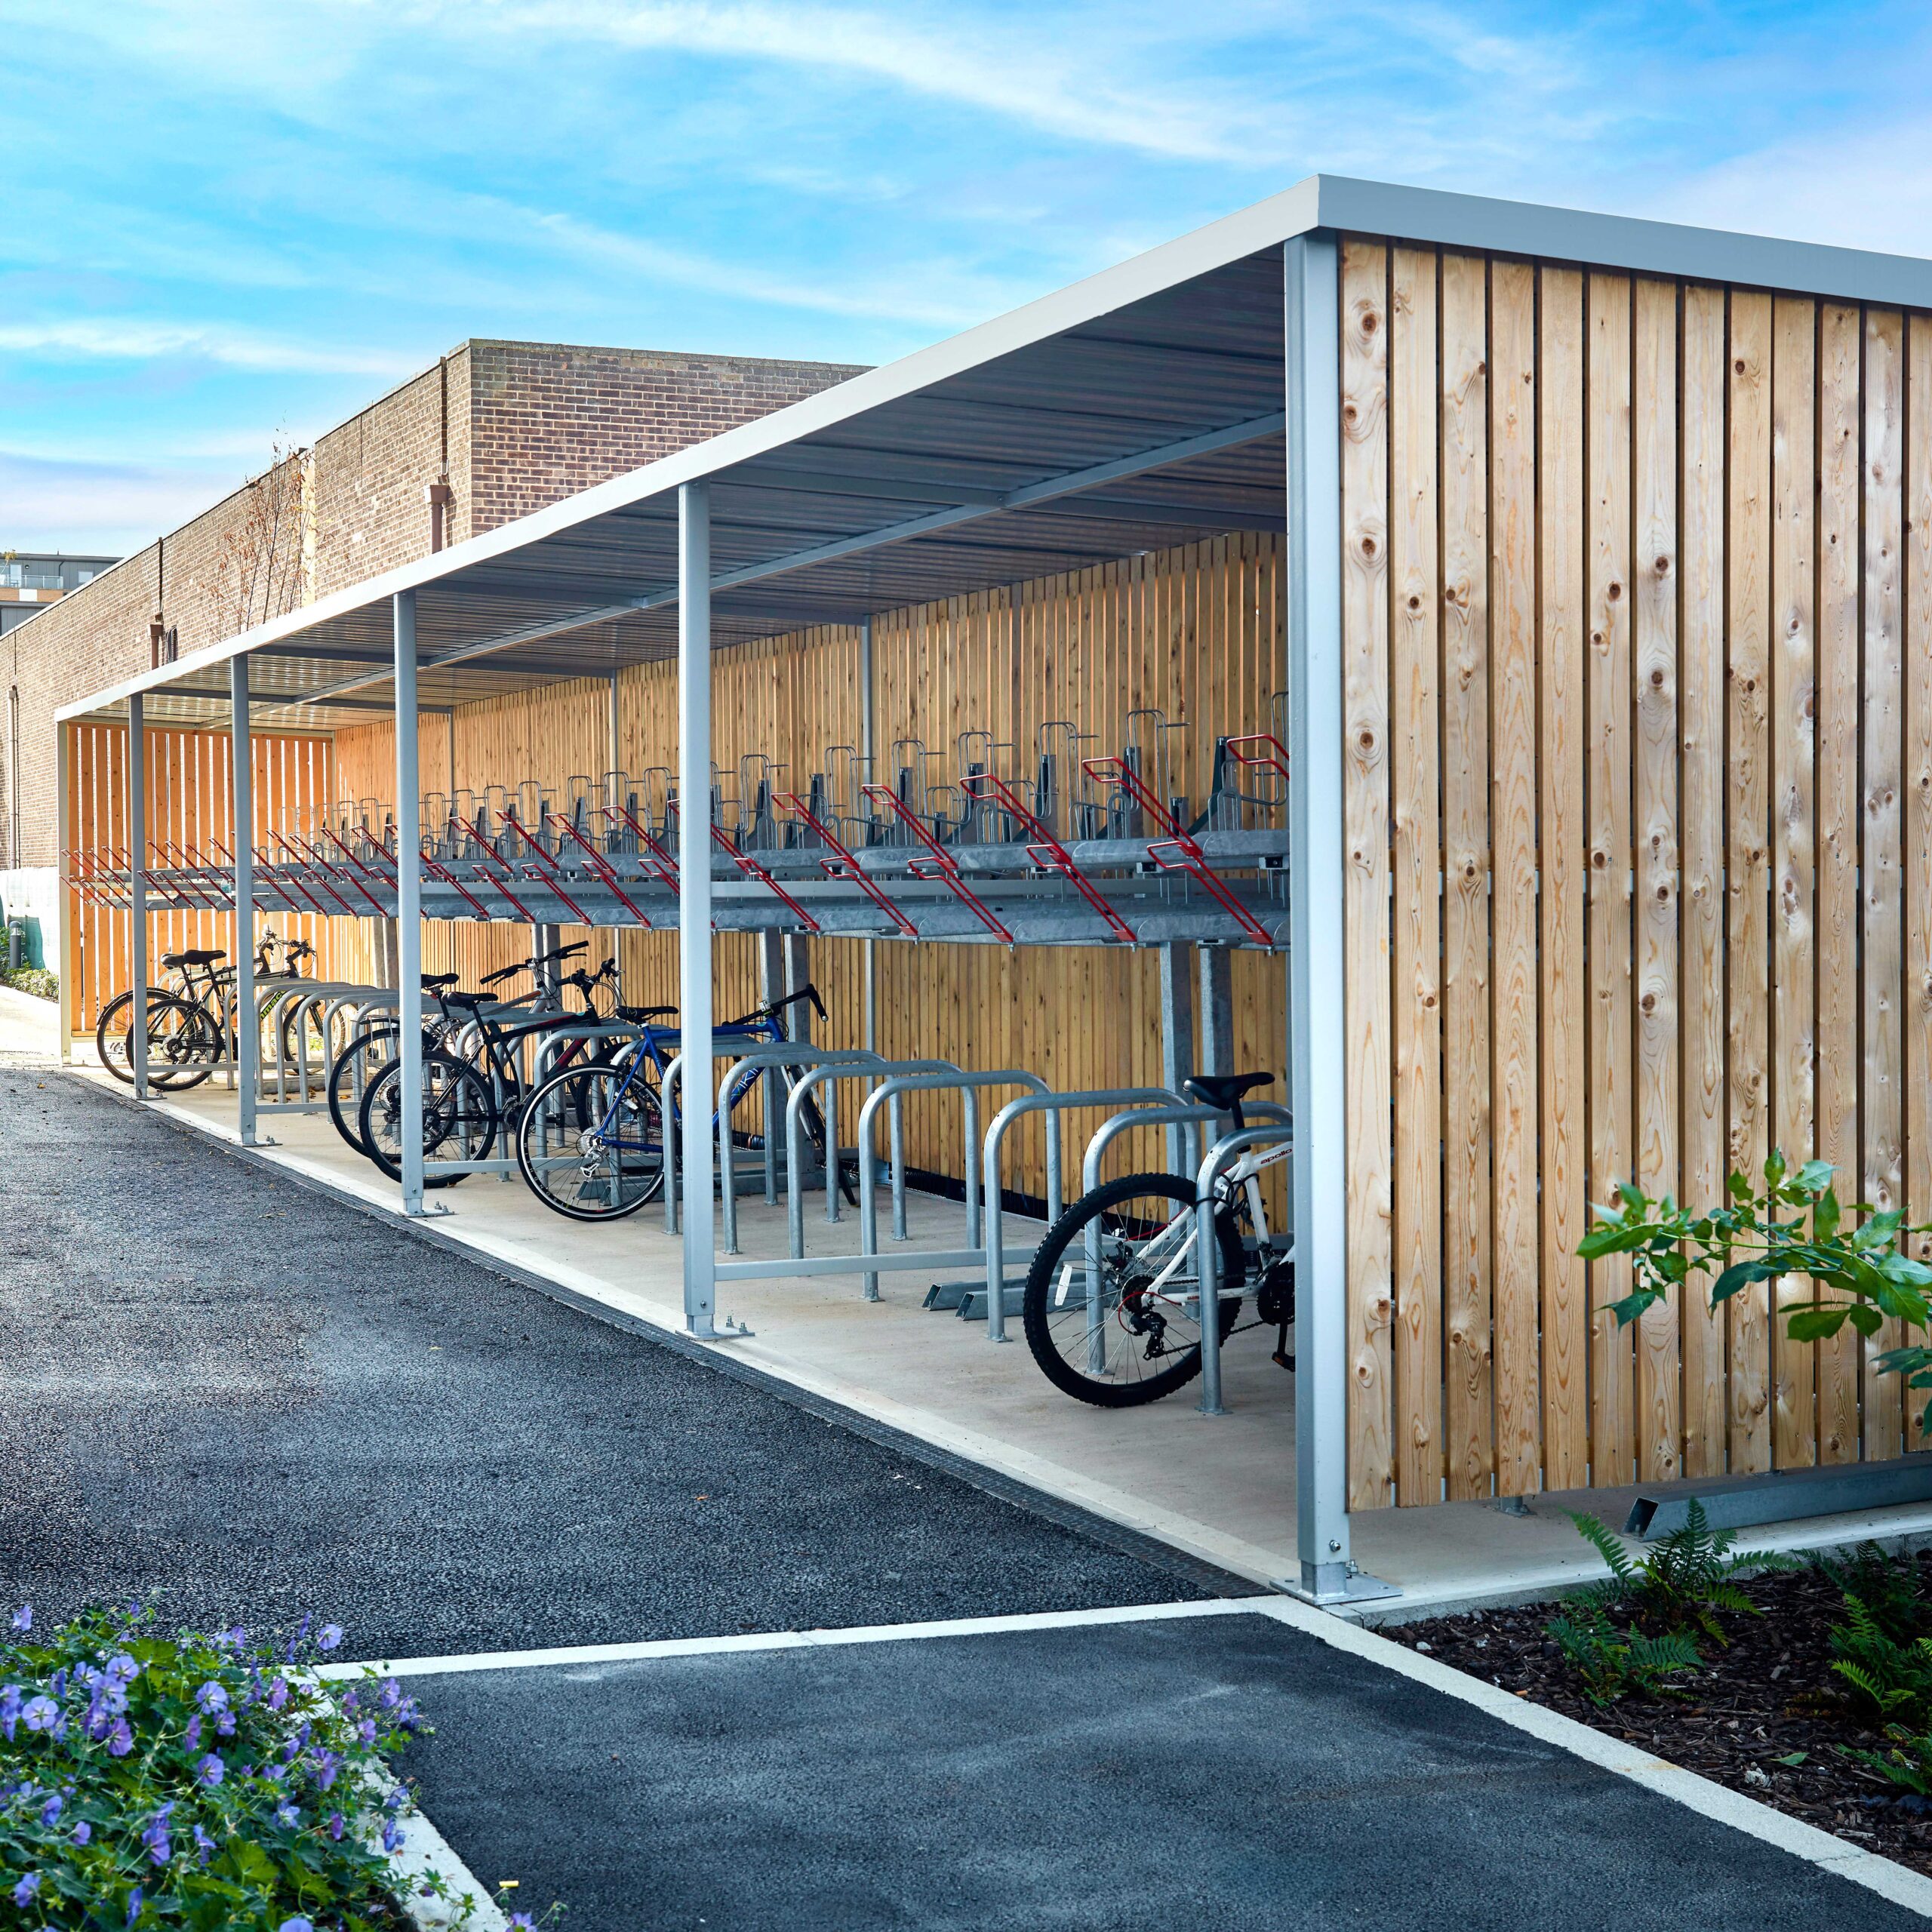 A covered bicycle parking area with empty racks and a few parked bicycles, featuring a wooden back wall and metal supports.